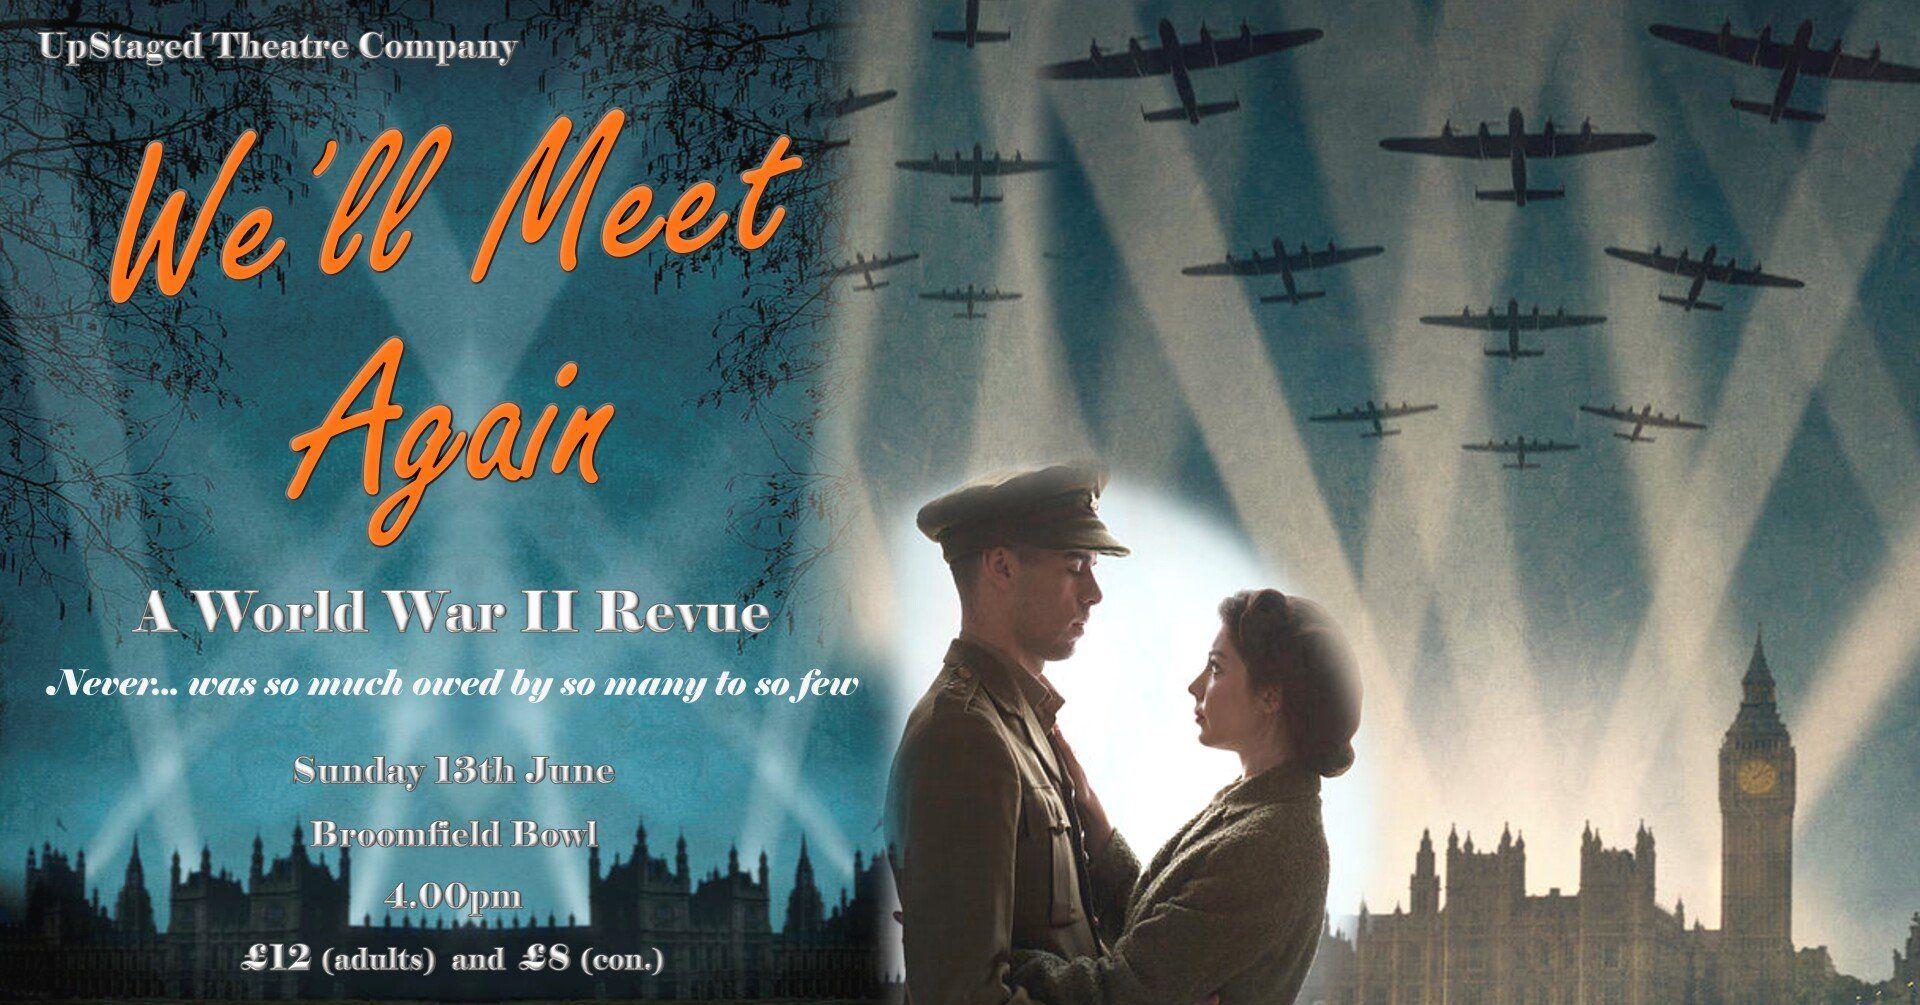 A poster for a play called we 'll meet again